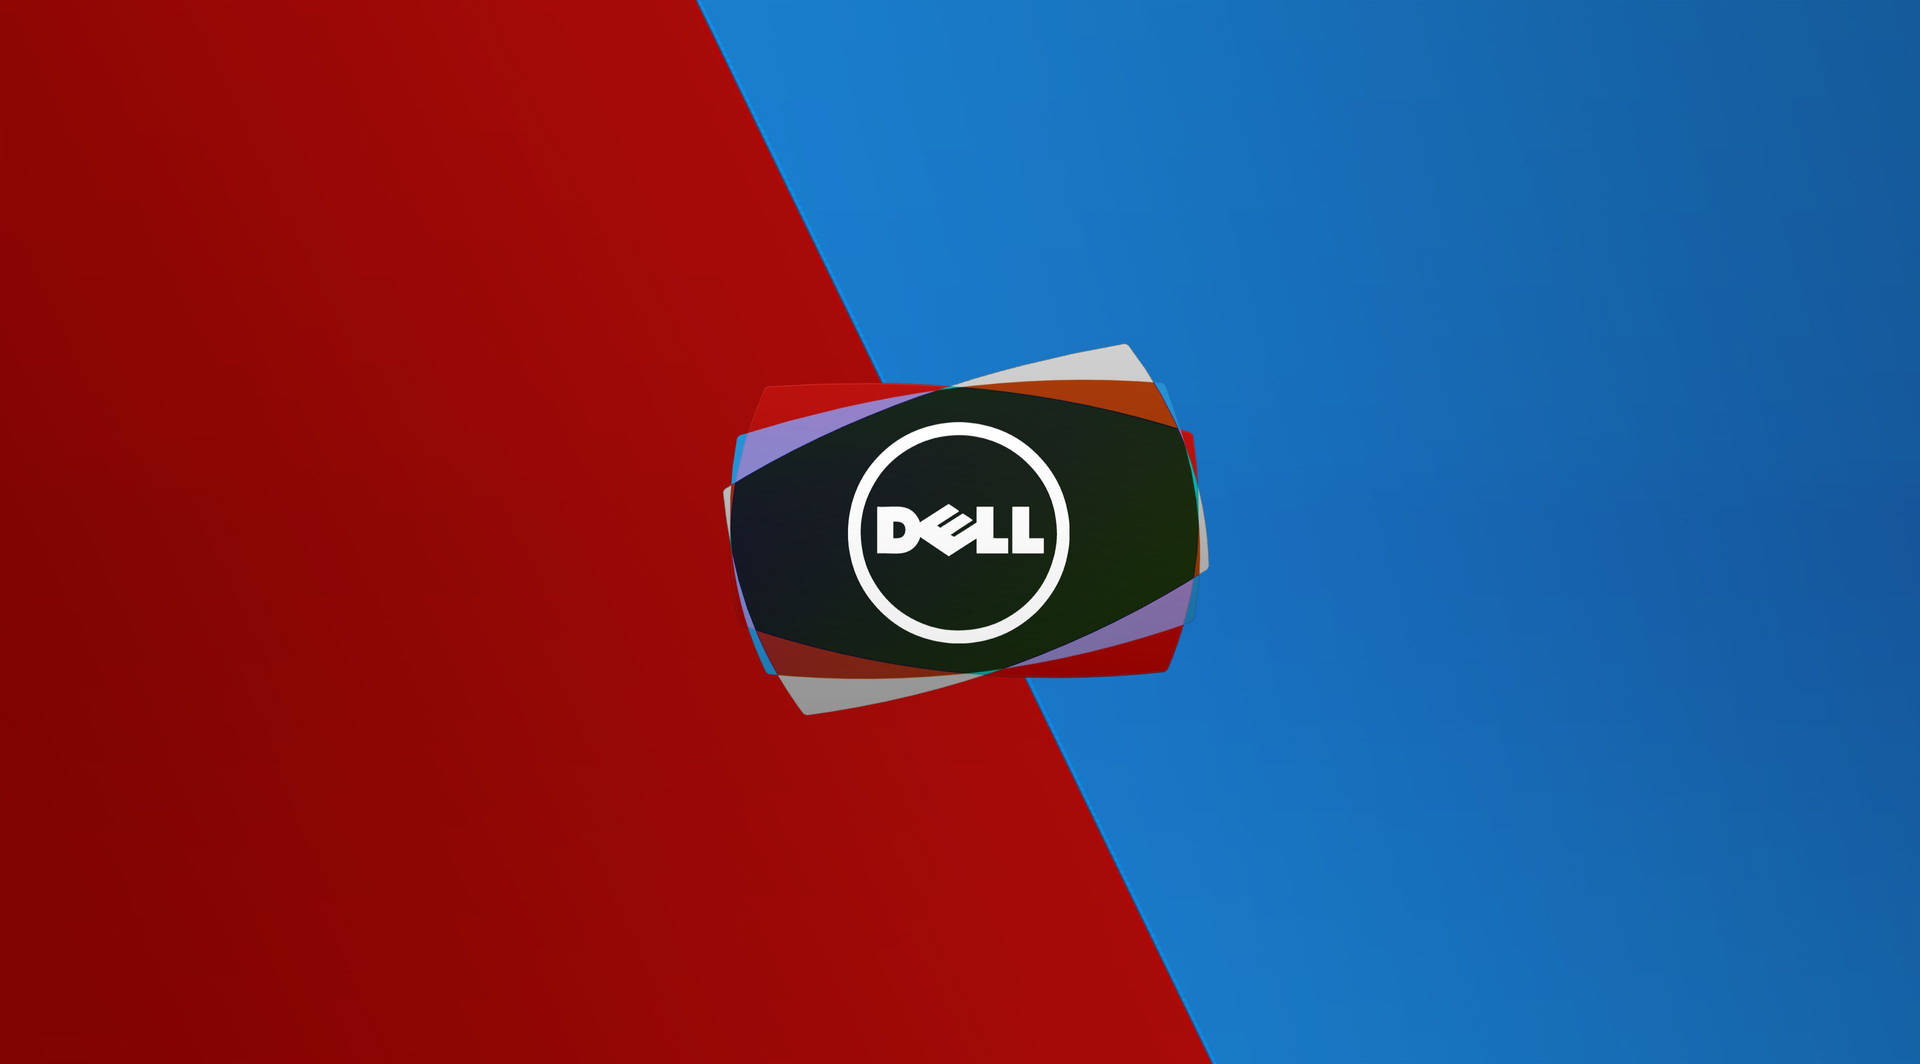 Dell 4k Logo And Colored Swatches